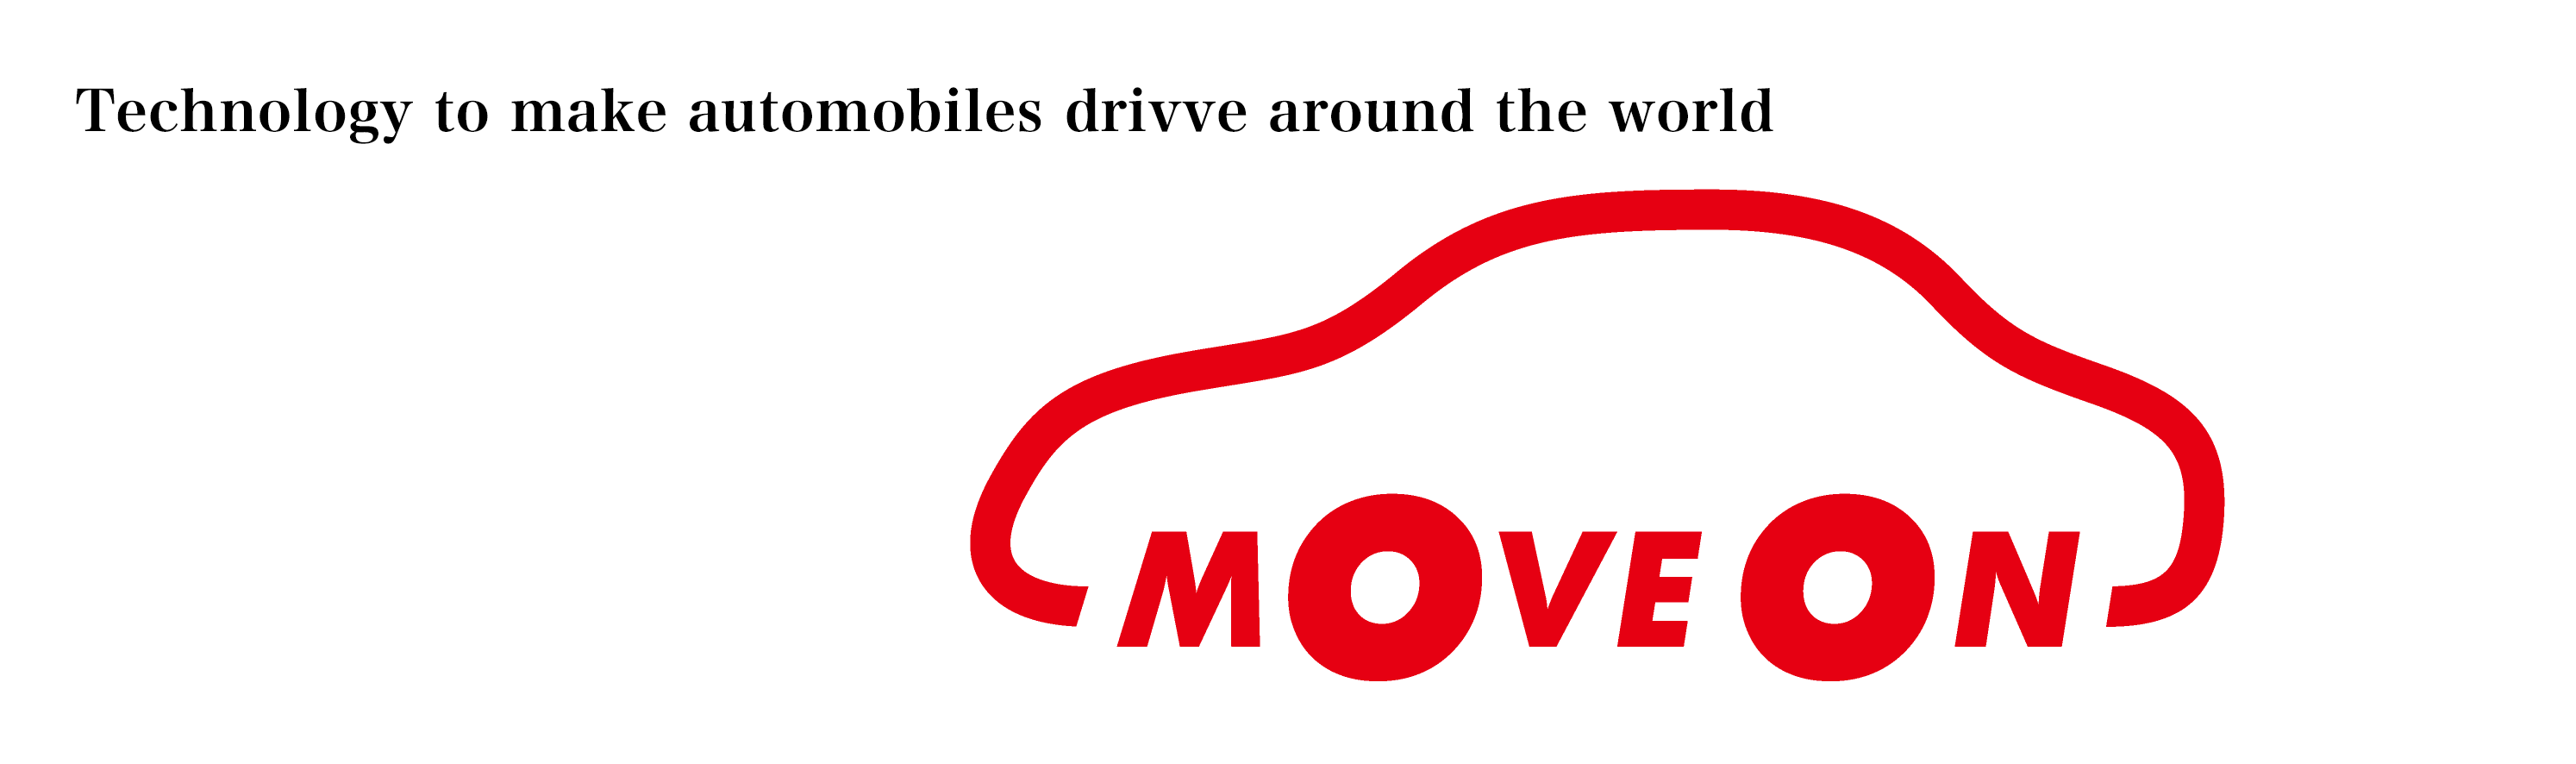 「MOVE ON」Technology to make automobiles drive around the world